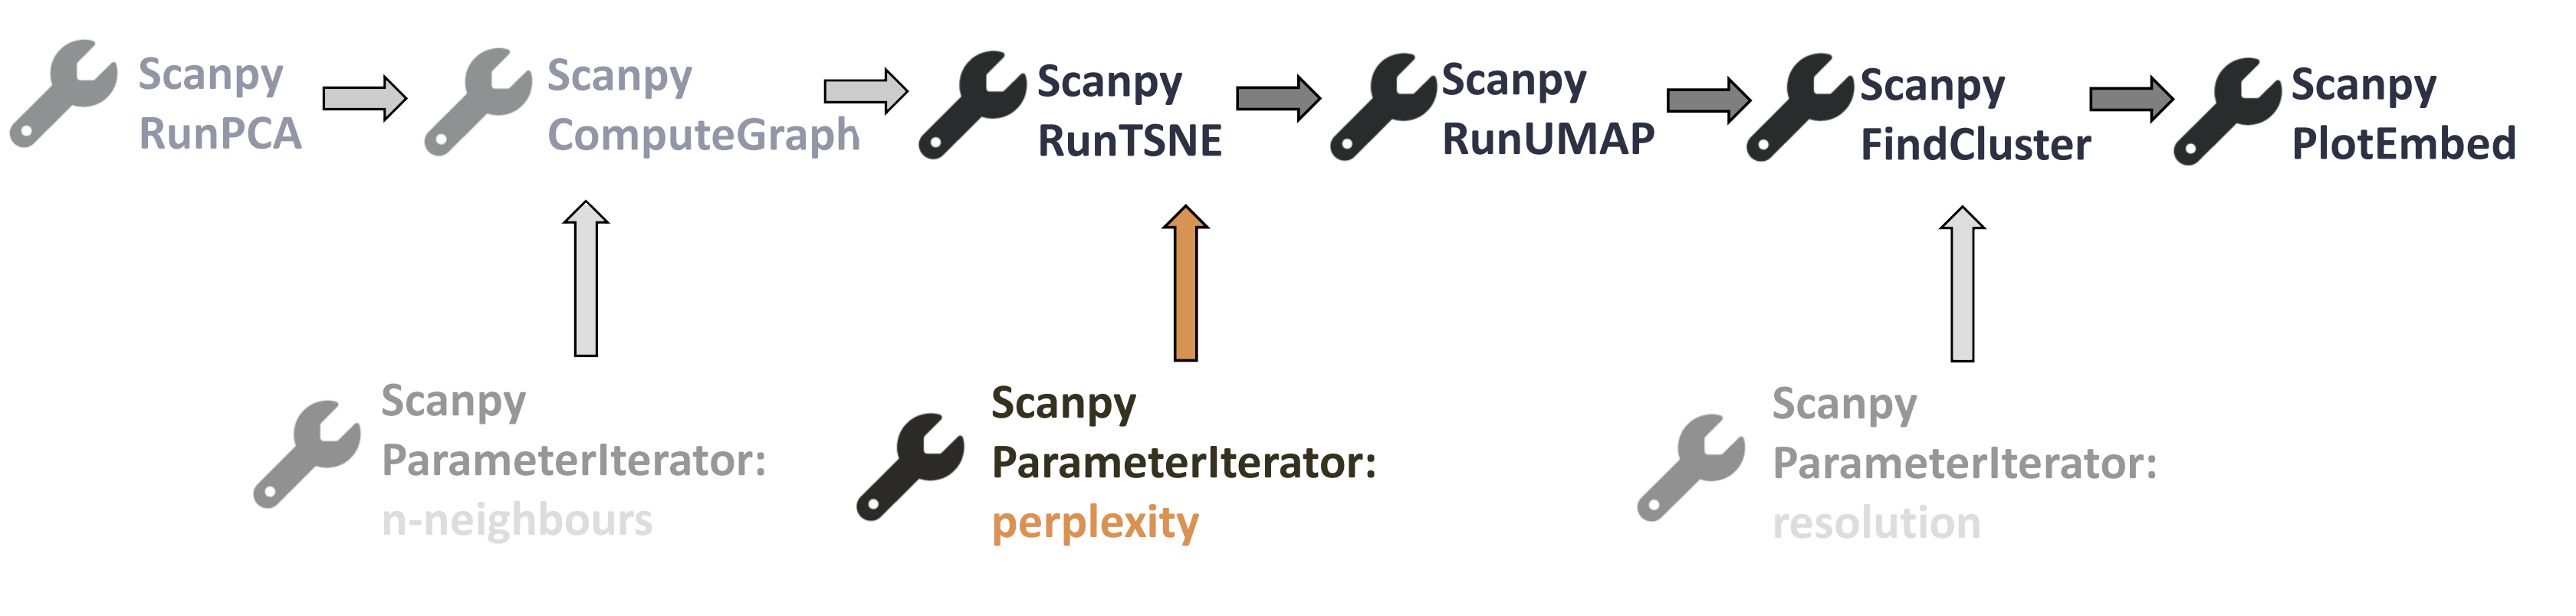 Image showing the step we are at: after Scanpy RunPCA and Scanpy ComputeGraph from which we will take one dataset to pass on to Scanpy RunTSNE with Parameter Iterator.